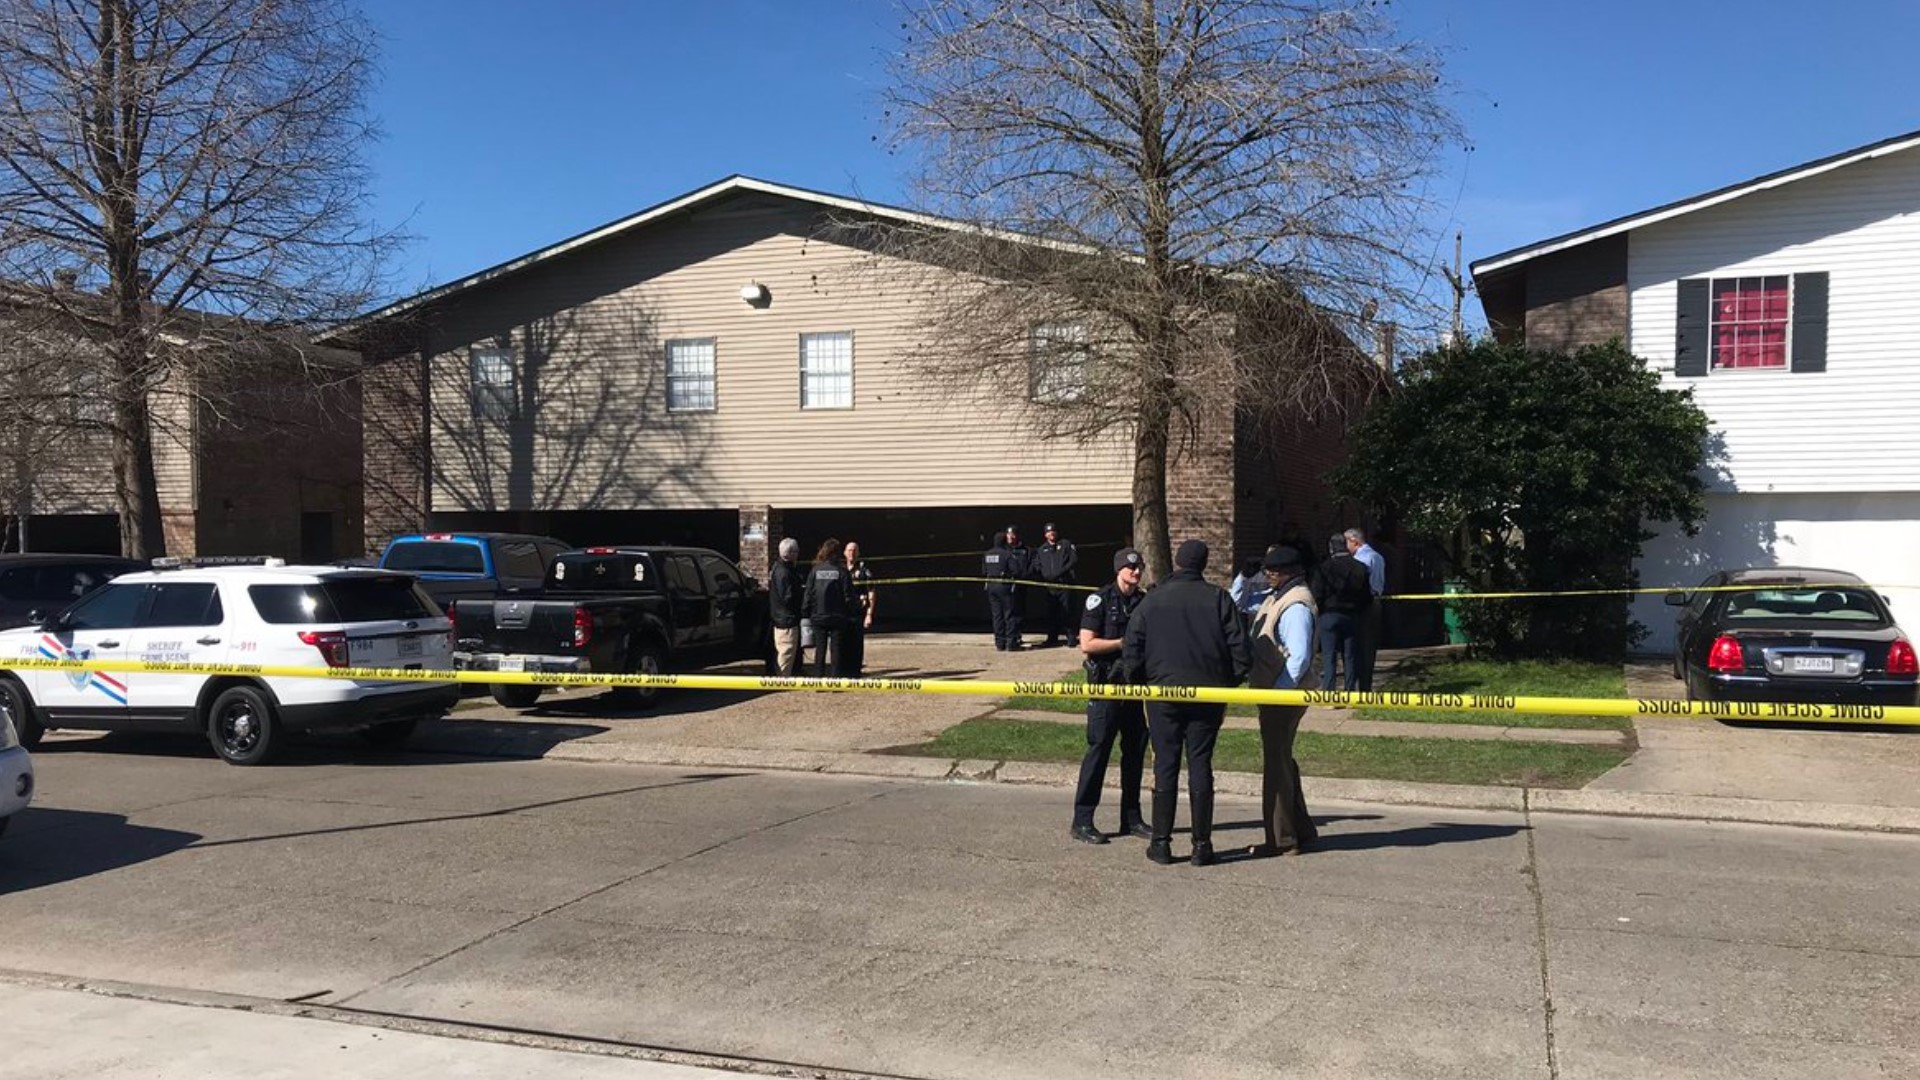 The Jefferson Parish Sheriff's Office says three people are dead, including two children, after a murder in Terrytown Wednesday morning.